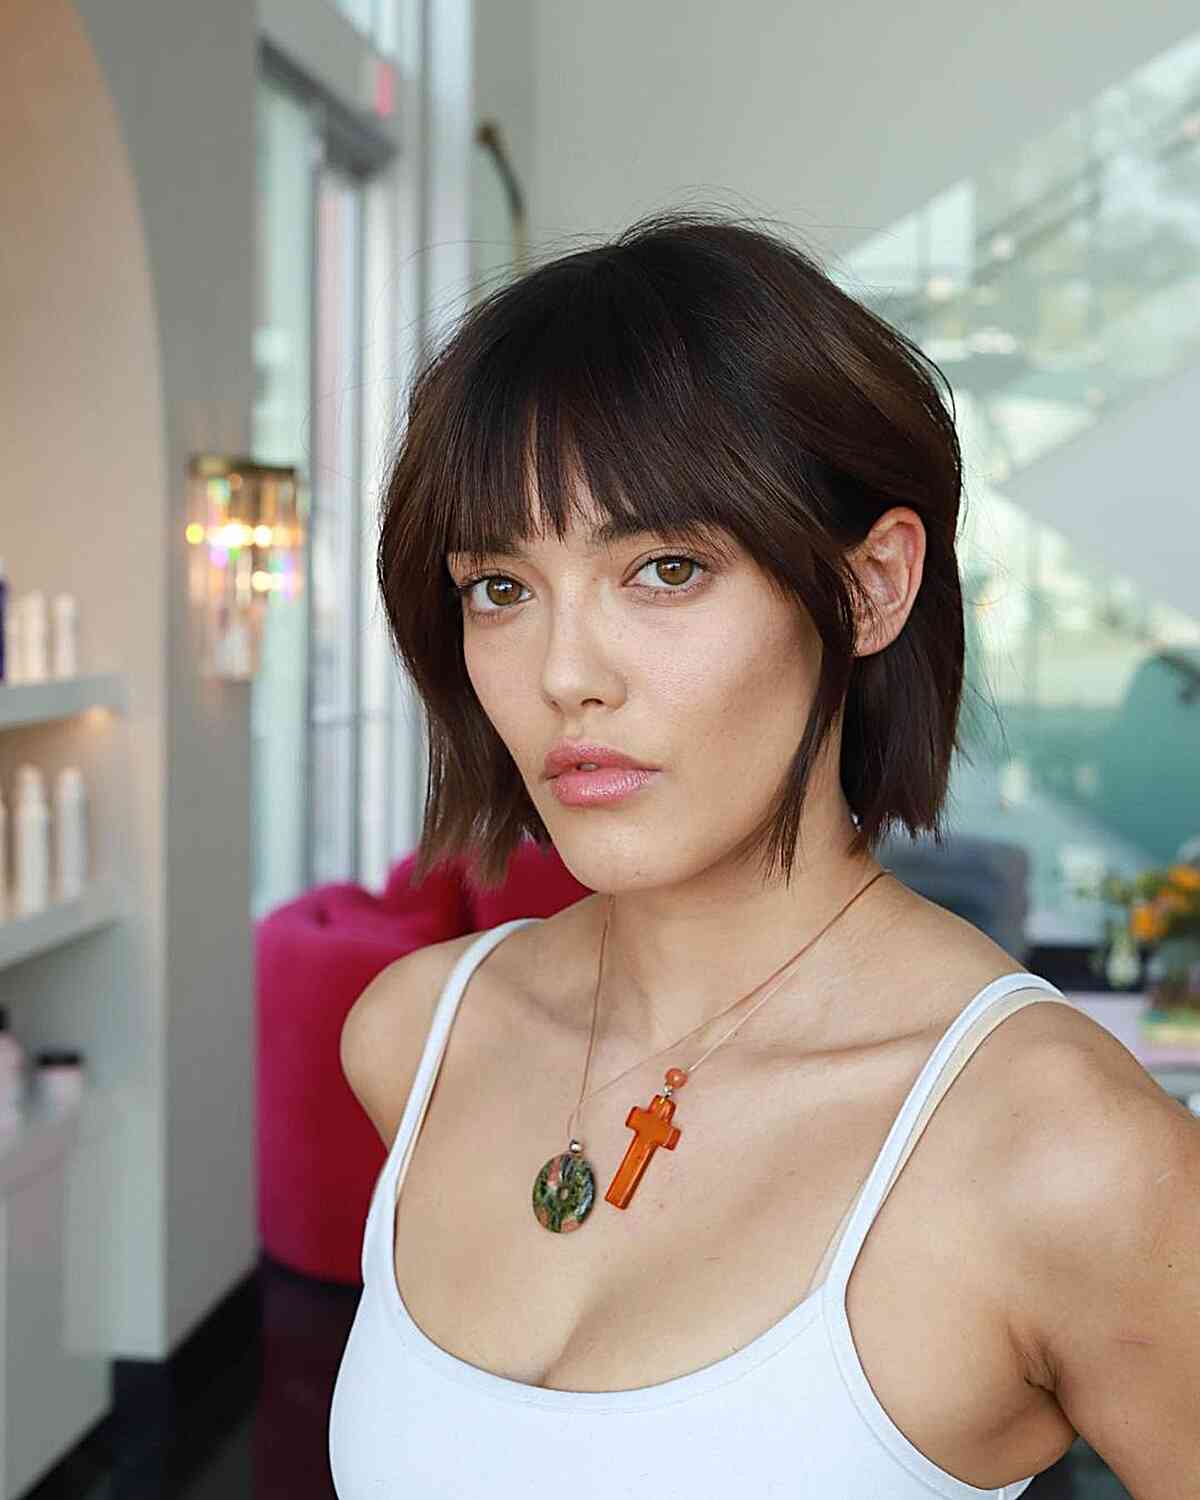 Neck-Length Blunt Bob with Blunt Choppy Bangs for fine hair